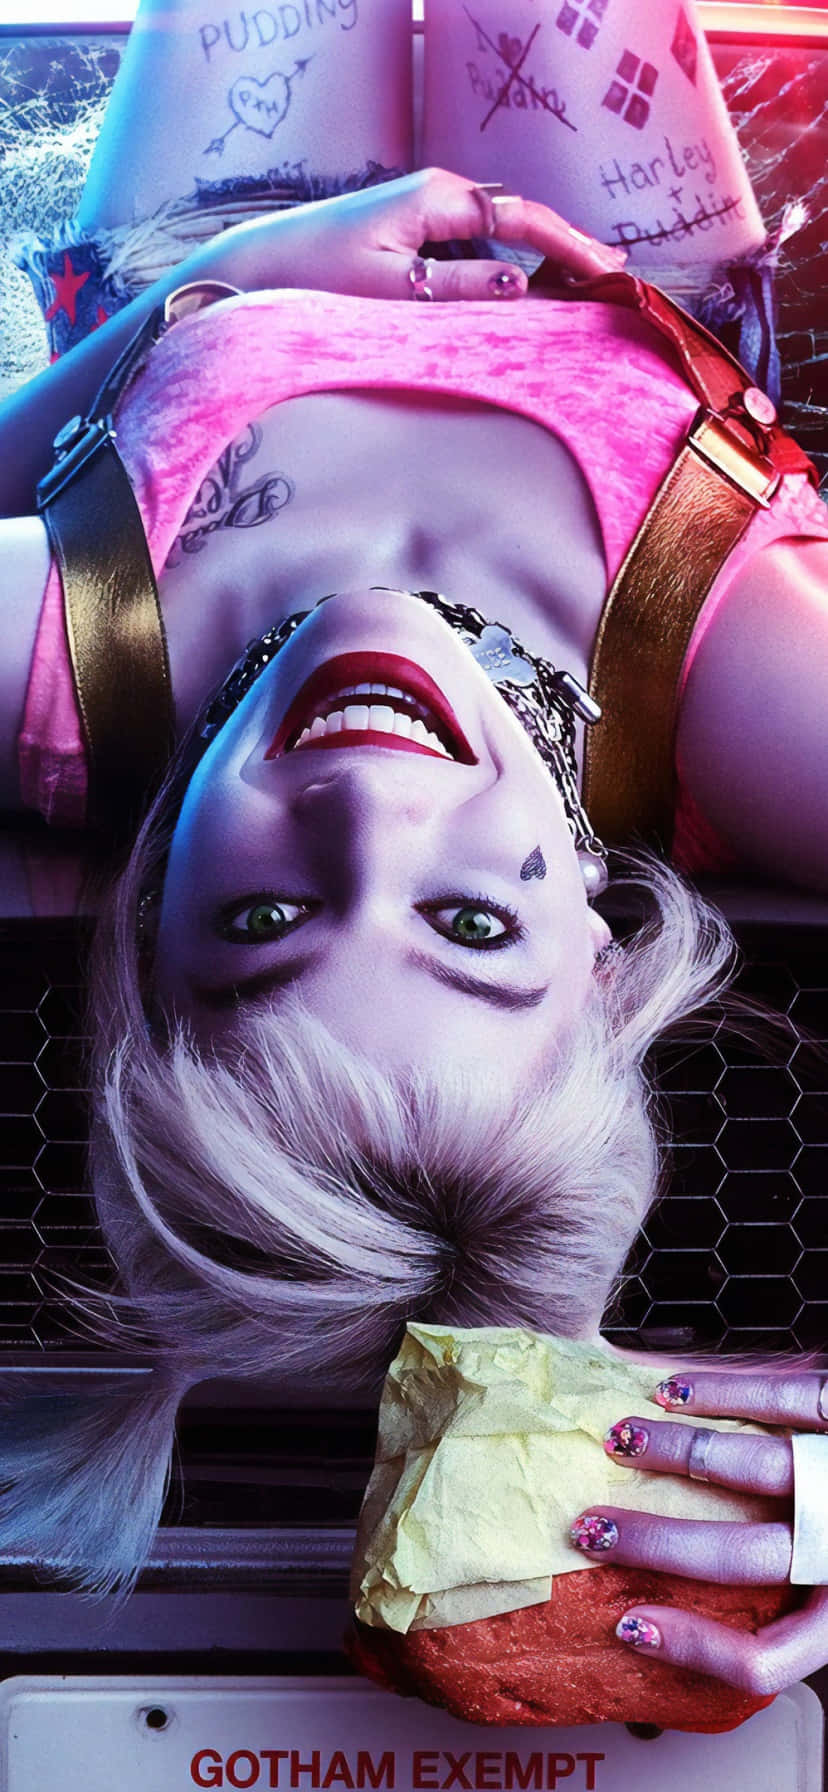 Margotrobbie Som Harley Quinn. (note: There Is No Direct Translation For 